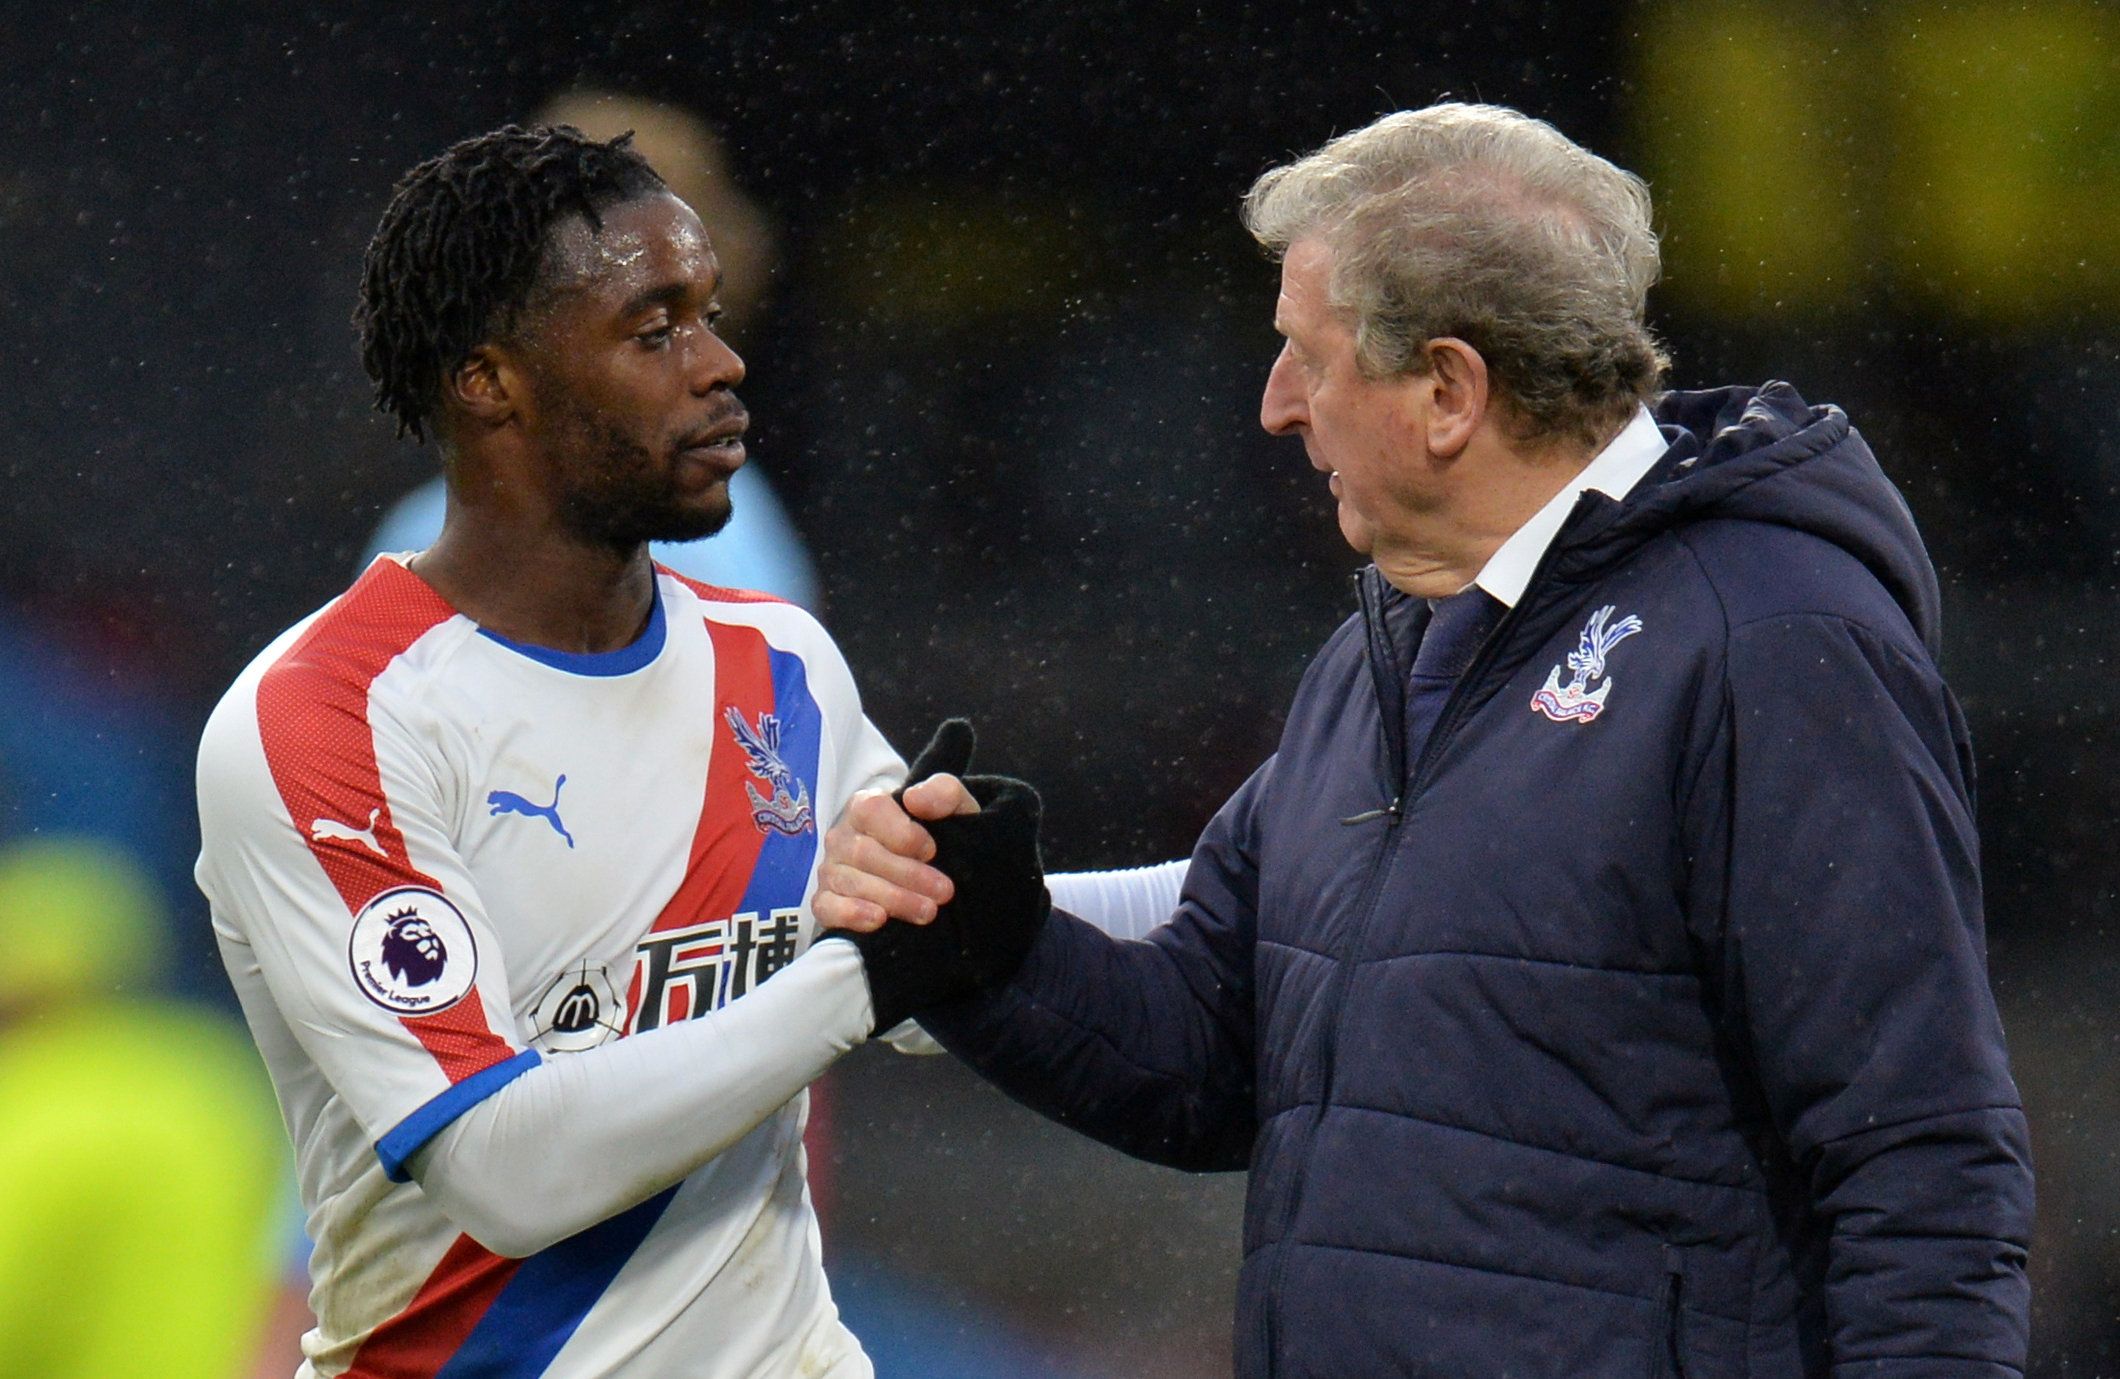 Soccer Football - Premier League - Burnley v Crystal Palace - Turf Moor, Burnley, Britain - March 2, 2019  Crystal Palace manager Roy Hodgson shakes hands with Jeffrey Schlupp at the end of the match   REUTERS/Peter Powell  EDITORIAL USE ONLY. No use with unauthorized audio, video, data, fixture lists, club/league logos or "live" services. Online in-match use limited to 75 images, no video emulation. No use in betting, games or single club/league/player publications.  Please contact your account